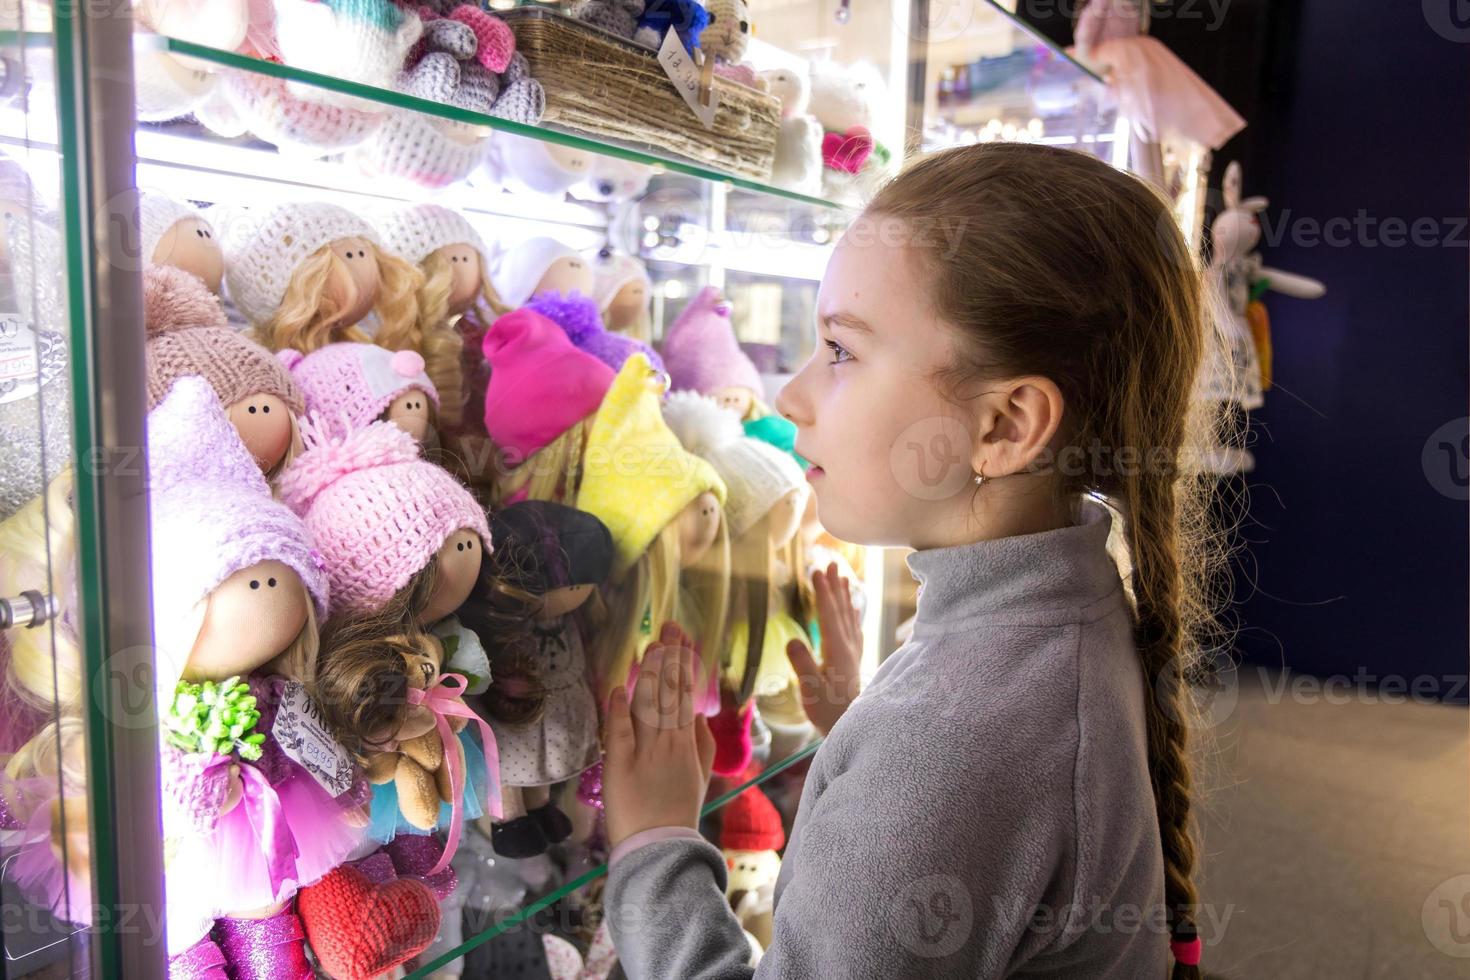 little cute girl looks with admiration at handmade dolls in a shop window photo